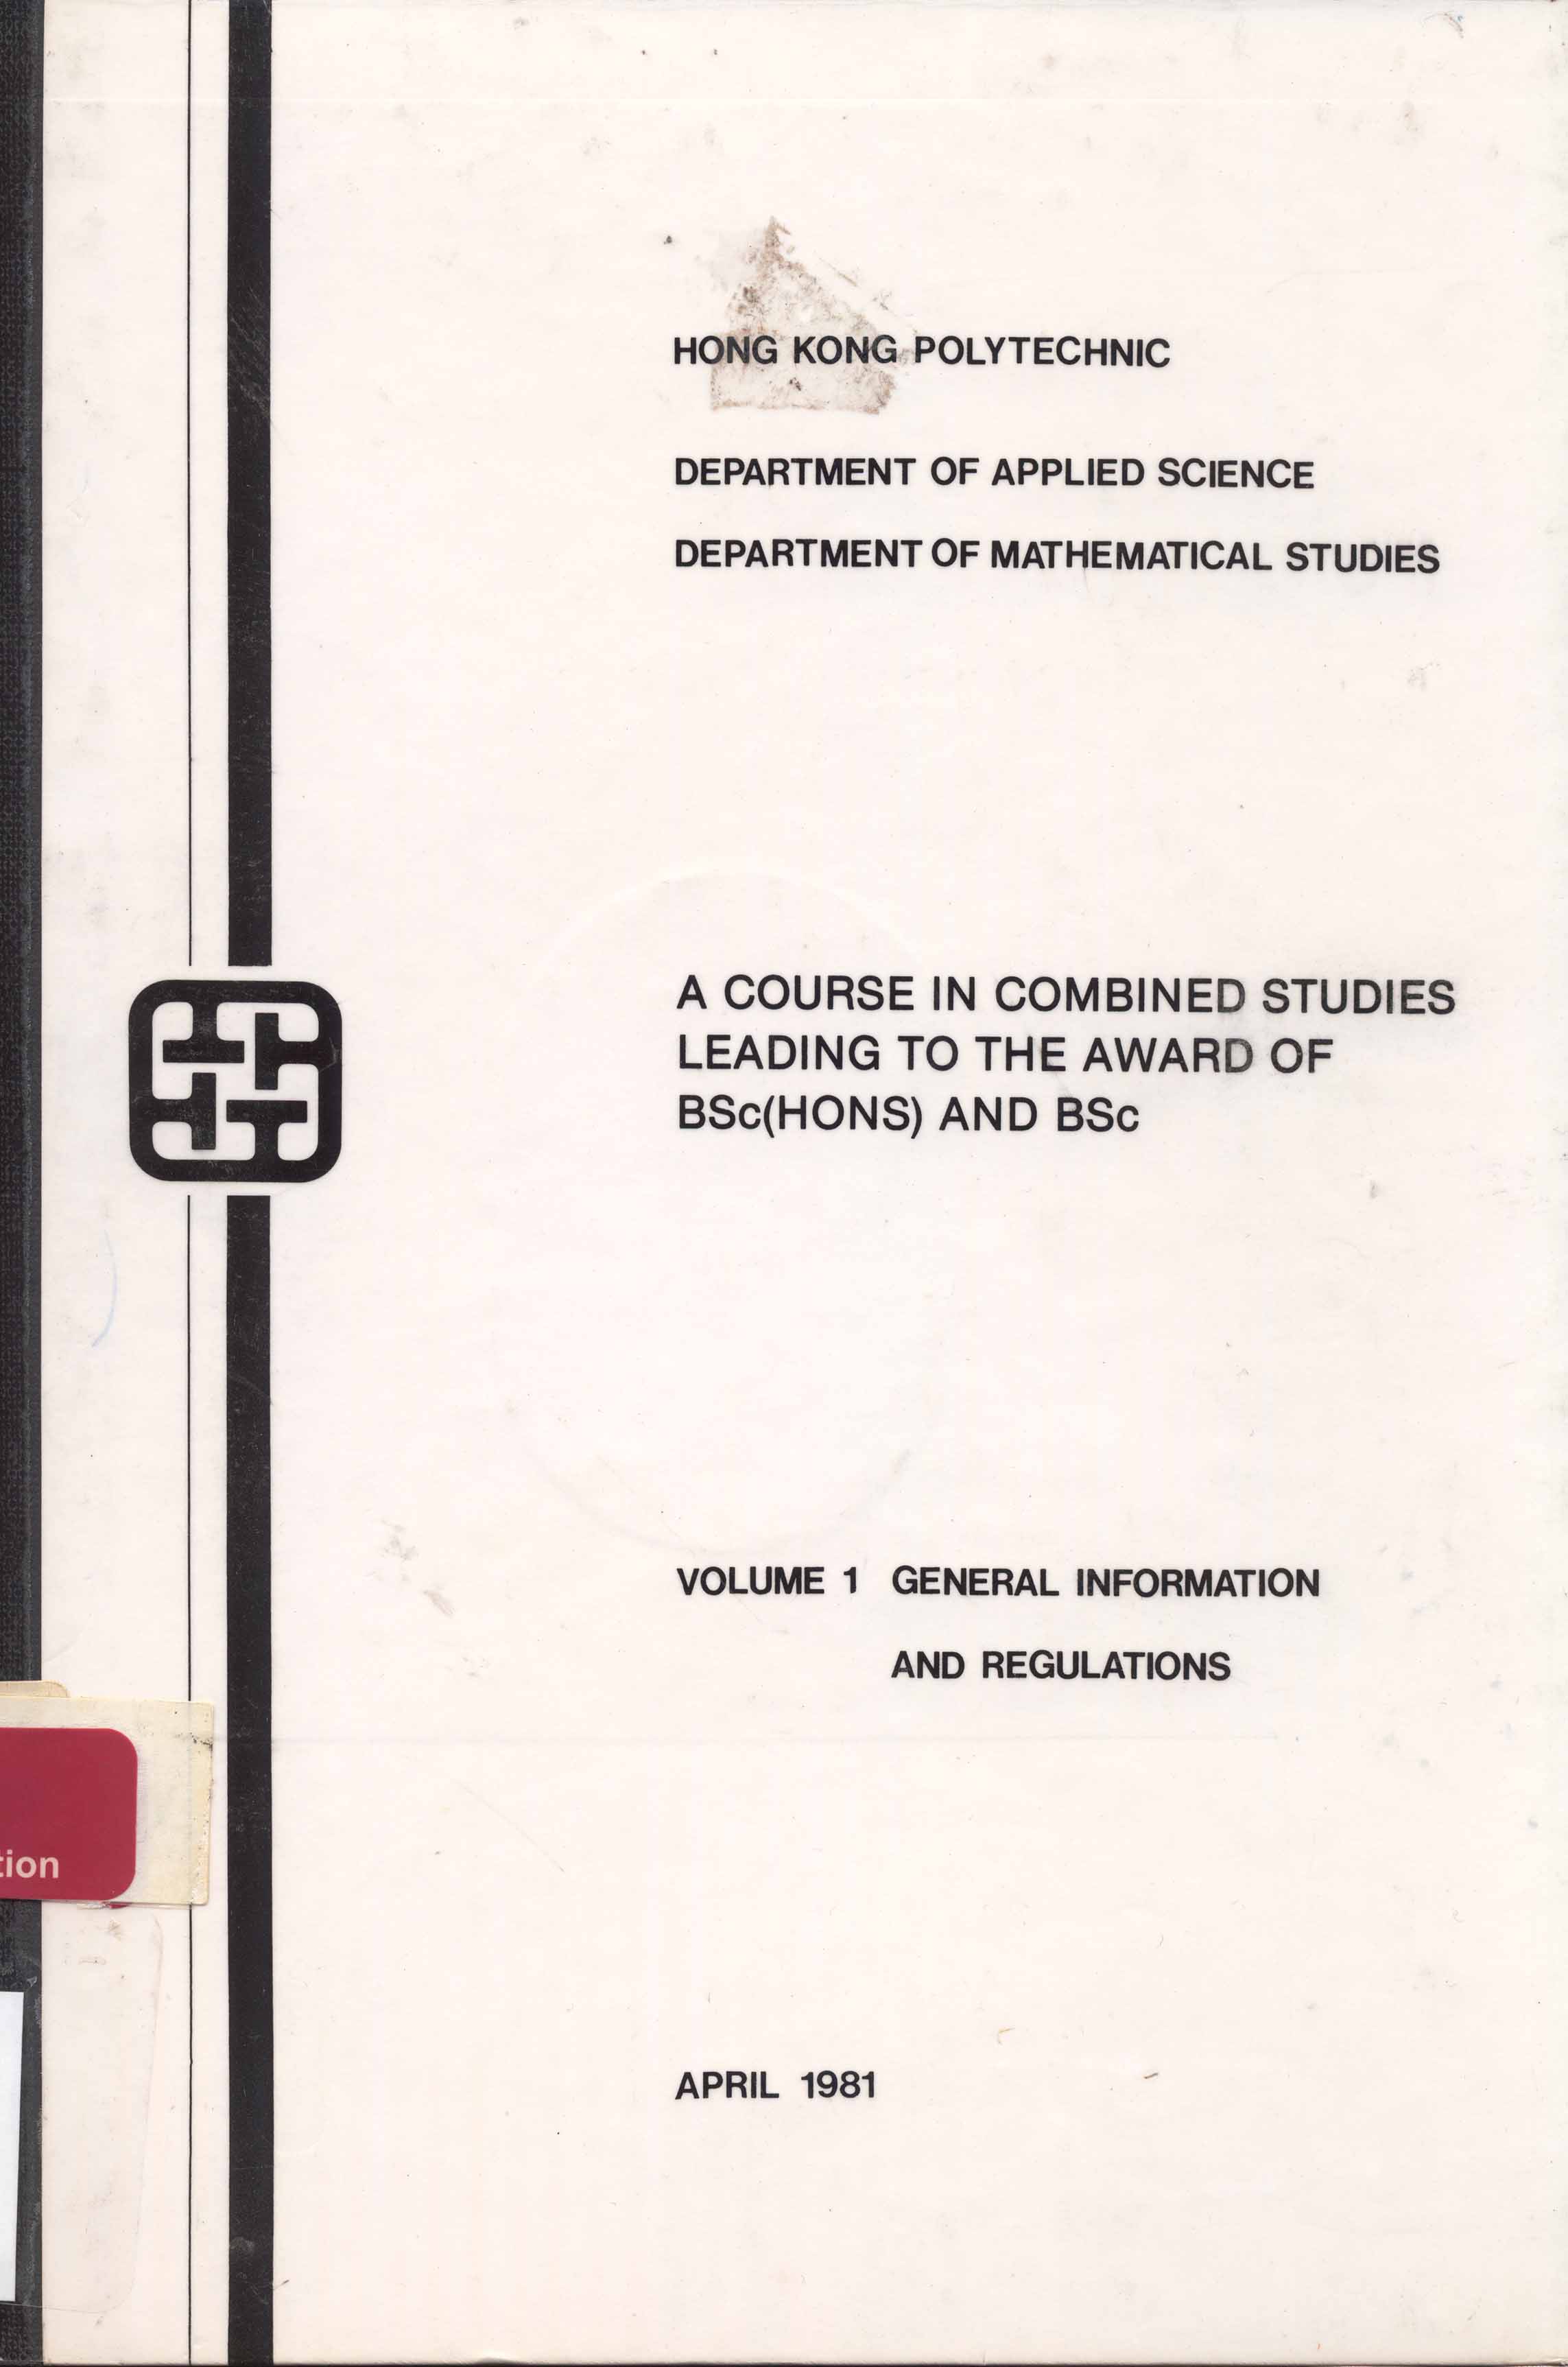 A course in combined studies leading to the award of BSc (Hons) and BSc. Volume 1: General information and regulations